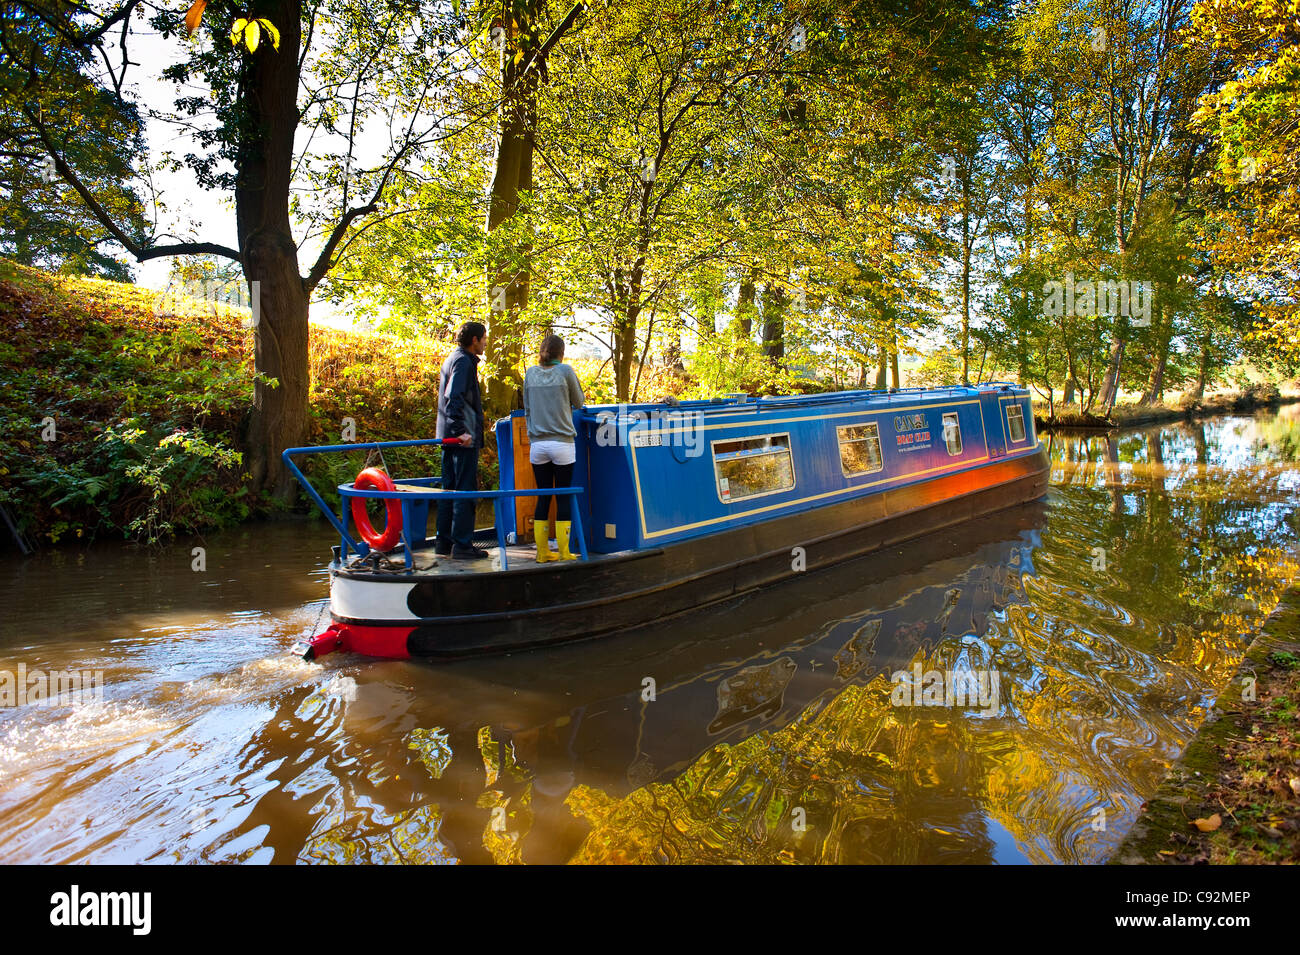 Narrow boat on the Llangollen Canal at Ellesmere, Shropshire UK in autumn Stock Photo